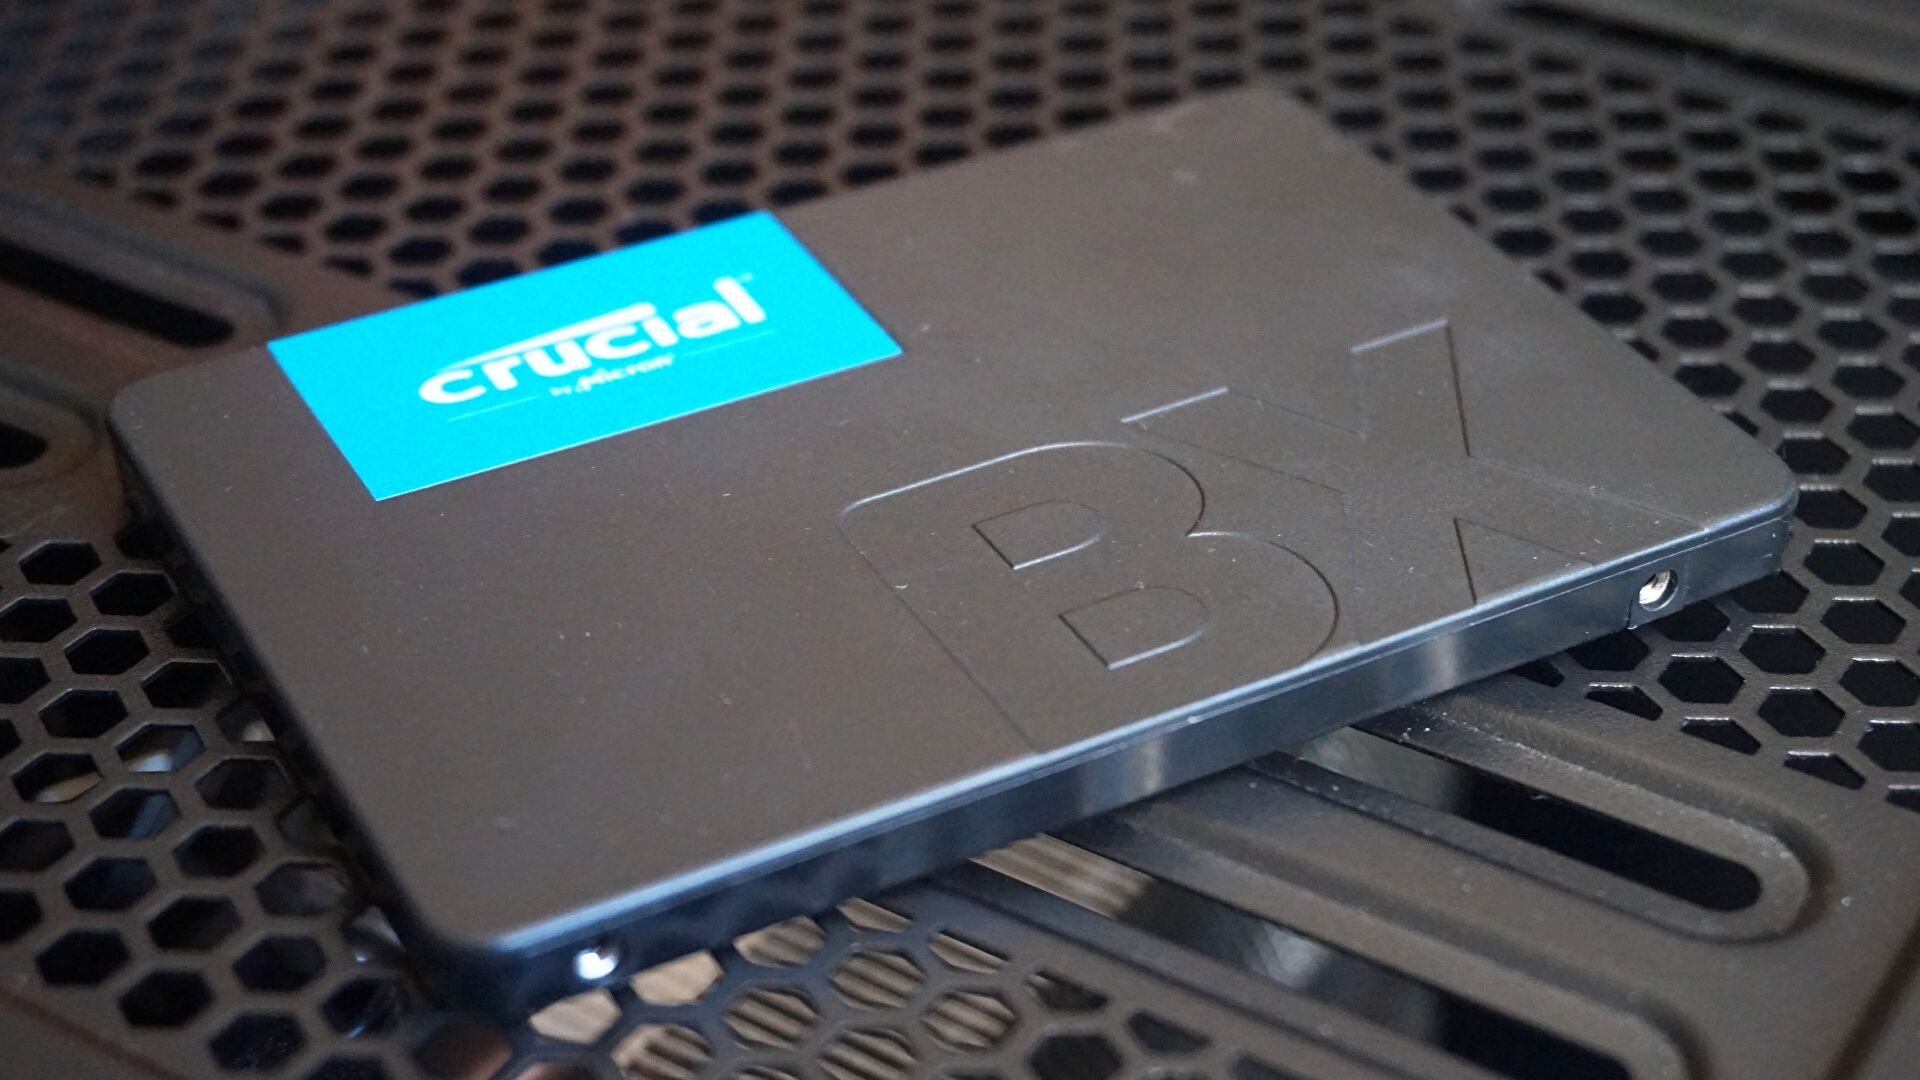 Pick up Crucial’s BX500 1TB SSD for £56 after a 24% discount